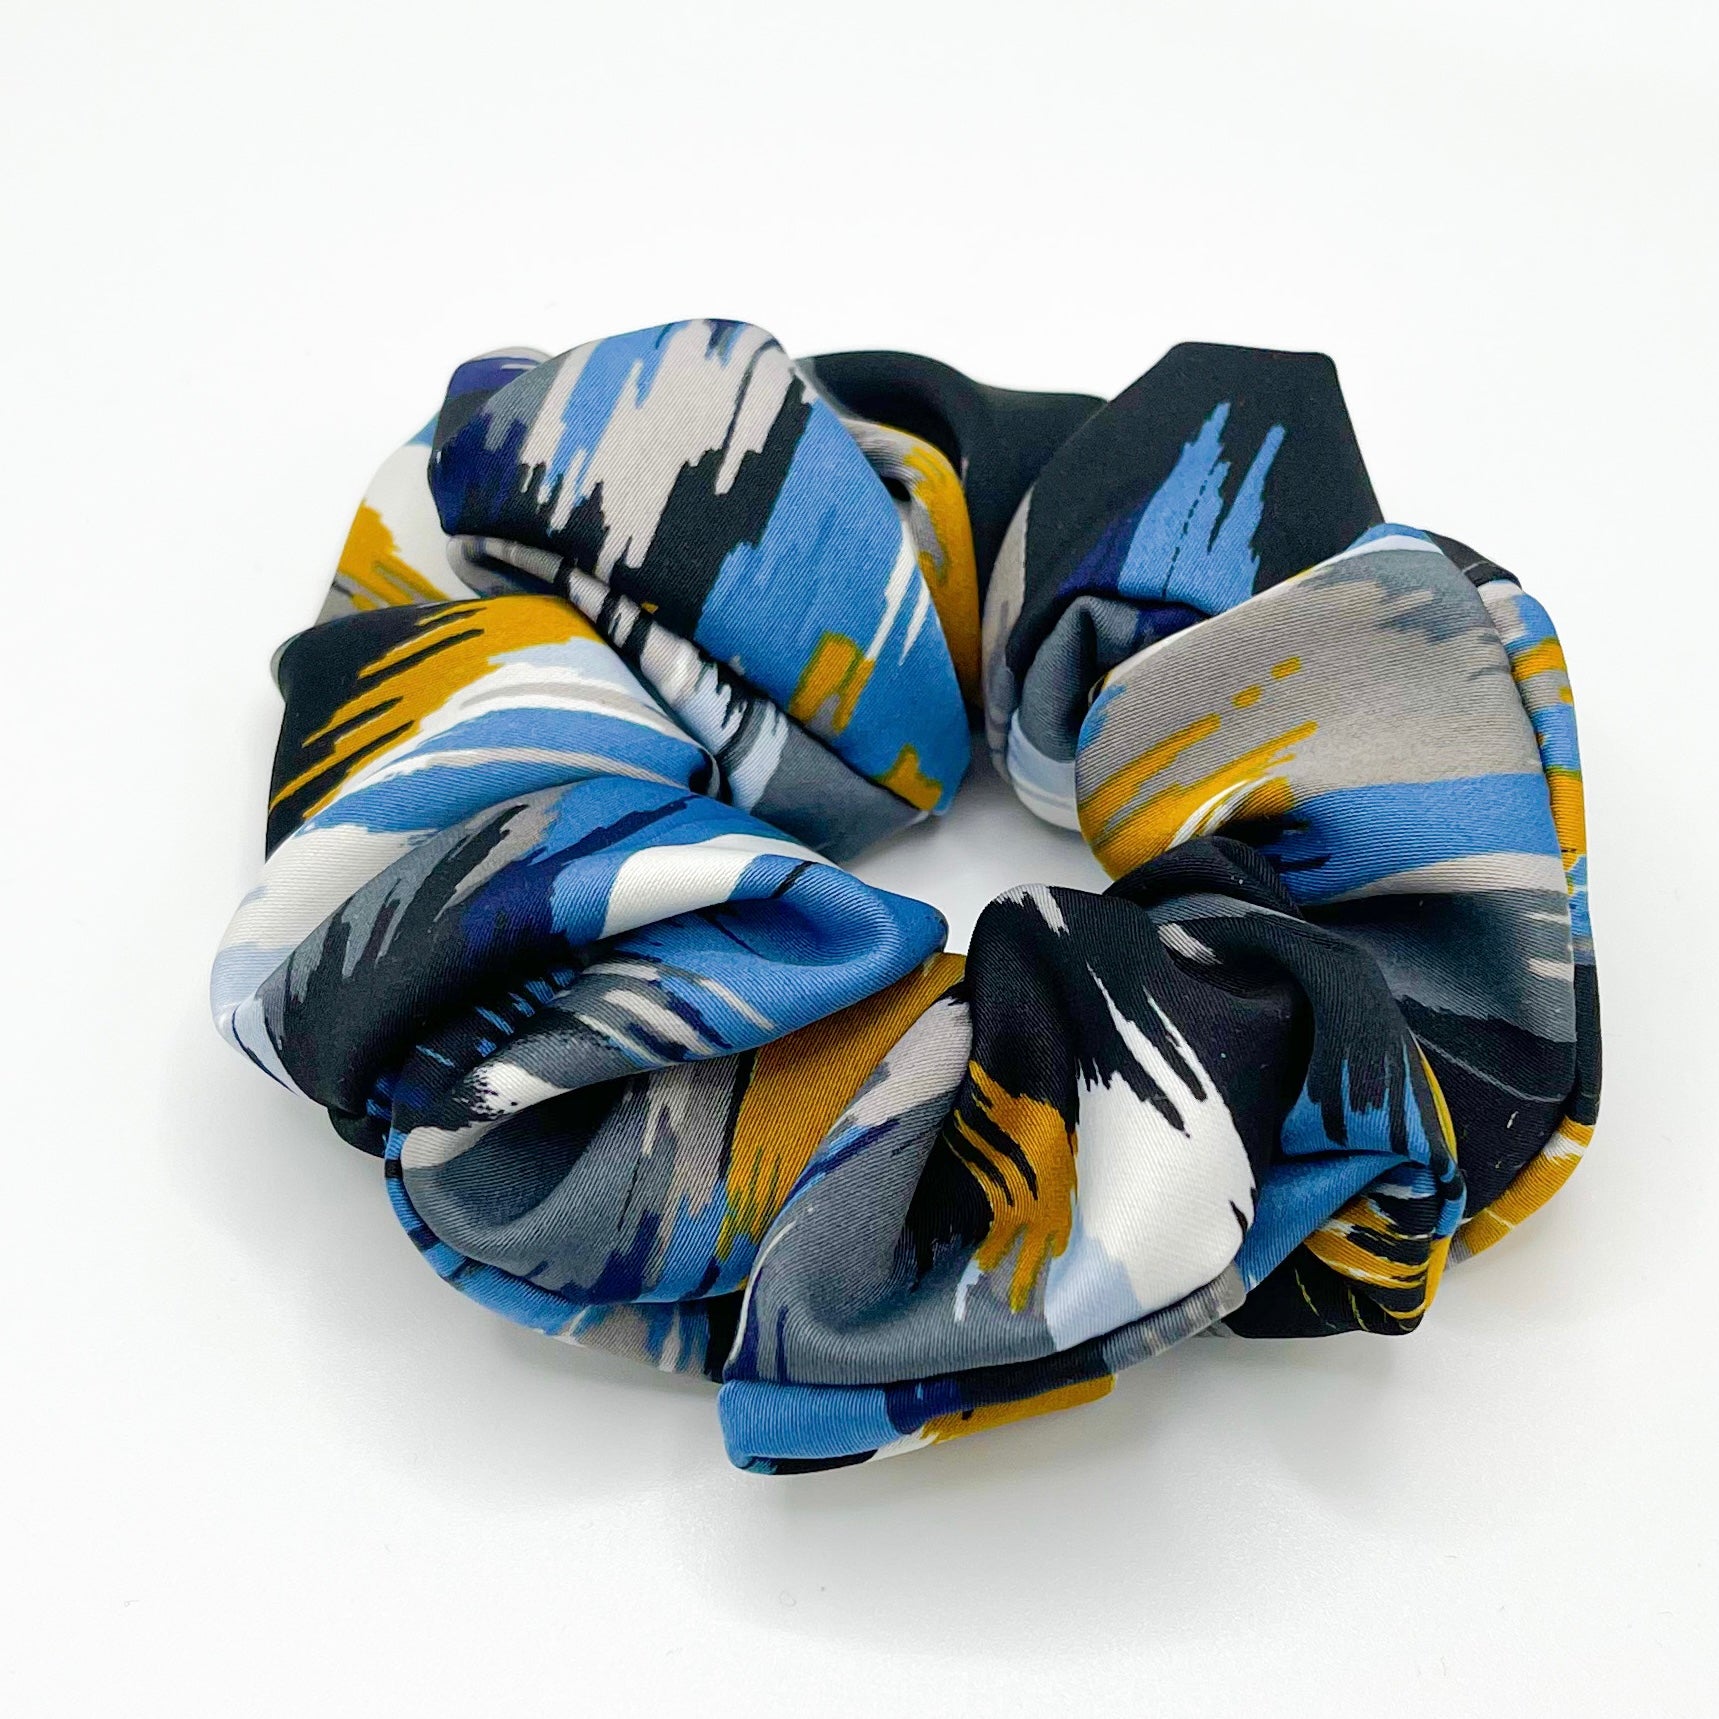 Silk scrunchie, smooth gentle hair tie for curly hair, hair tie gift for her